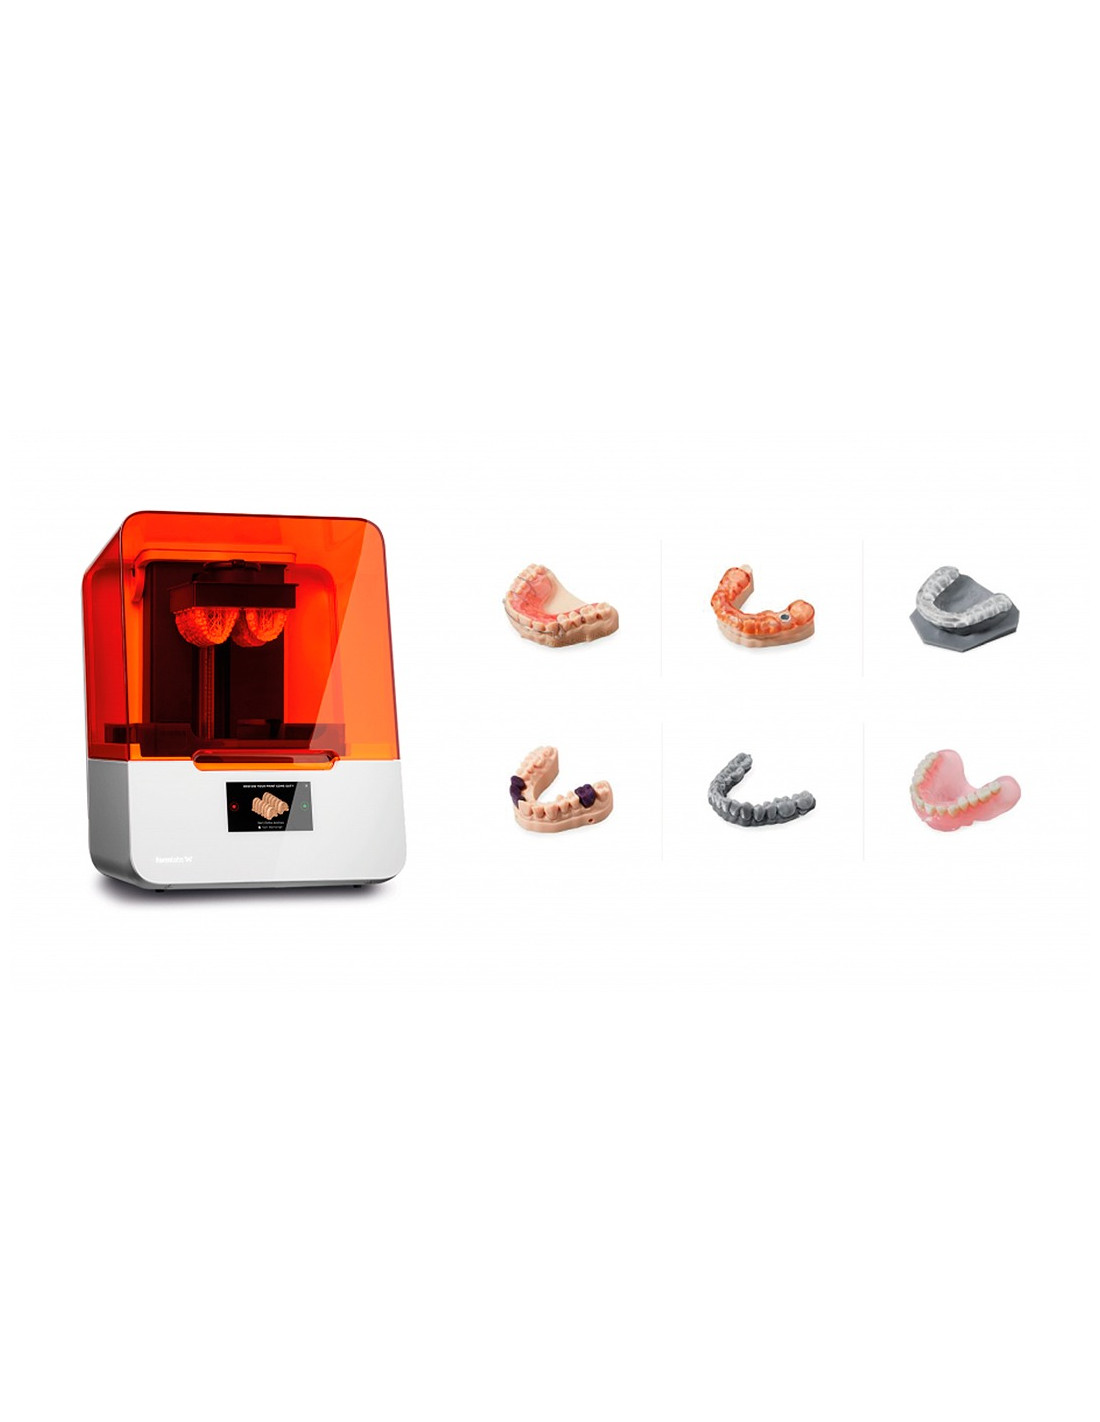 FormLabs Form 3B 3D Printer - basic package